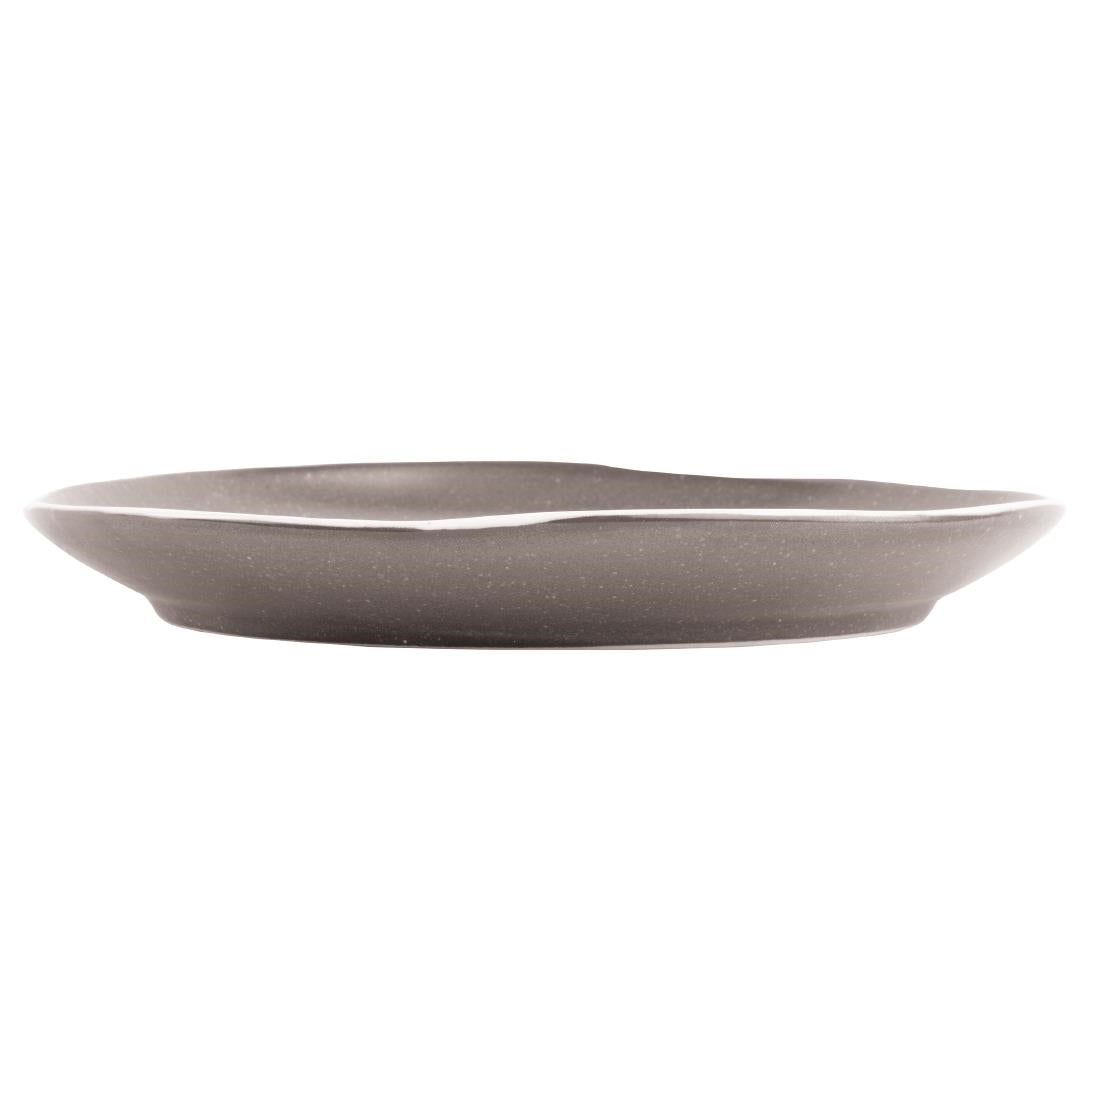 DR815 Olympia Chia Plates Charcoal 205mm (Pack of 6) JD Catering Equipment Solutions Ltd